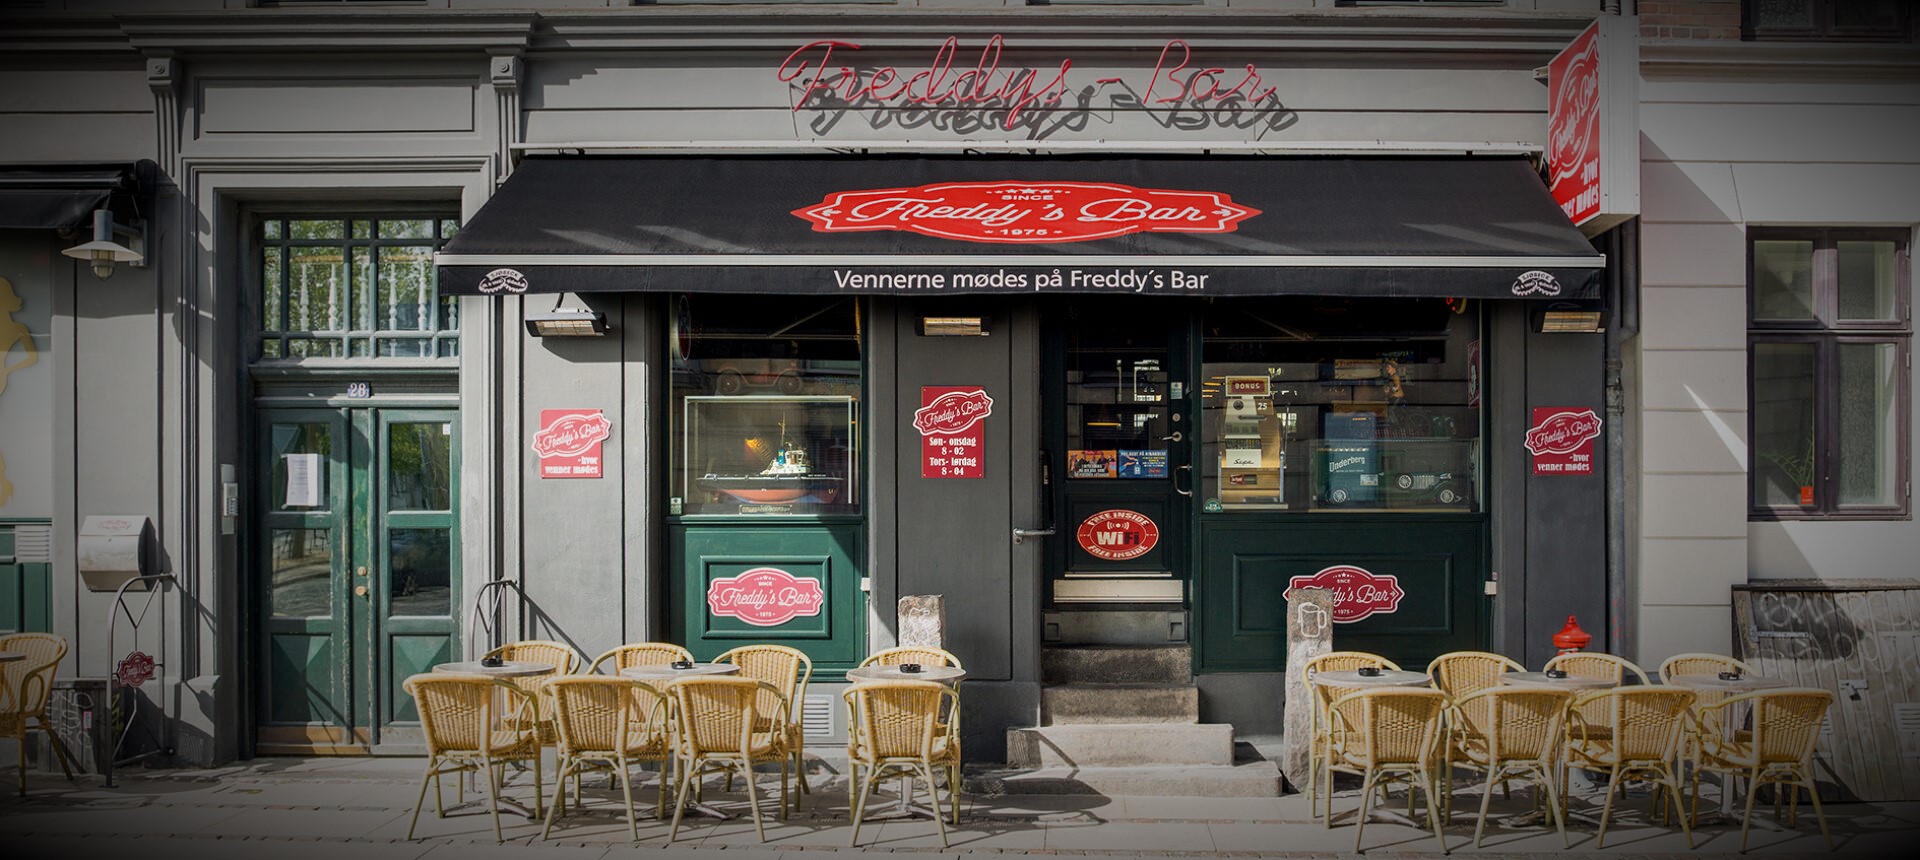 freddy's bar and kitchen ndsm